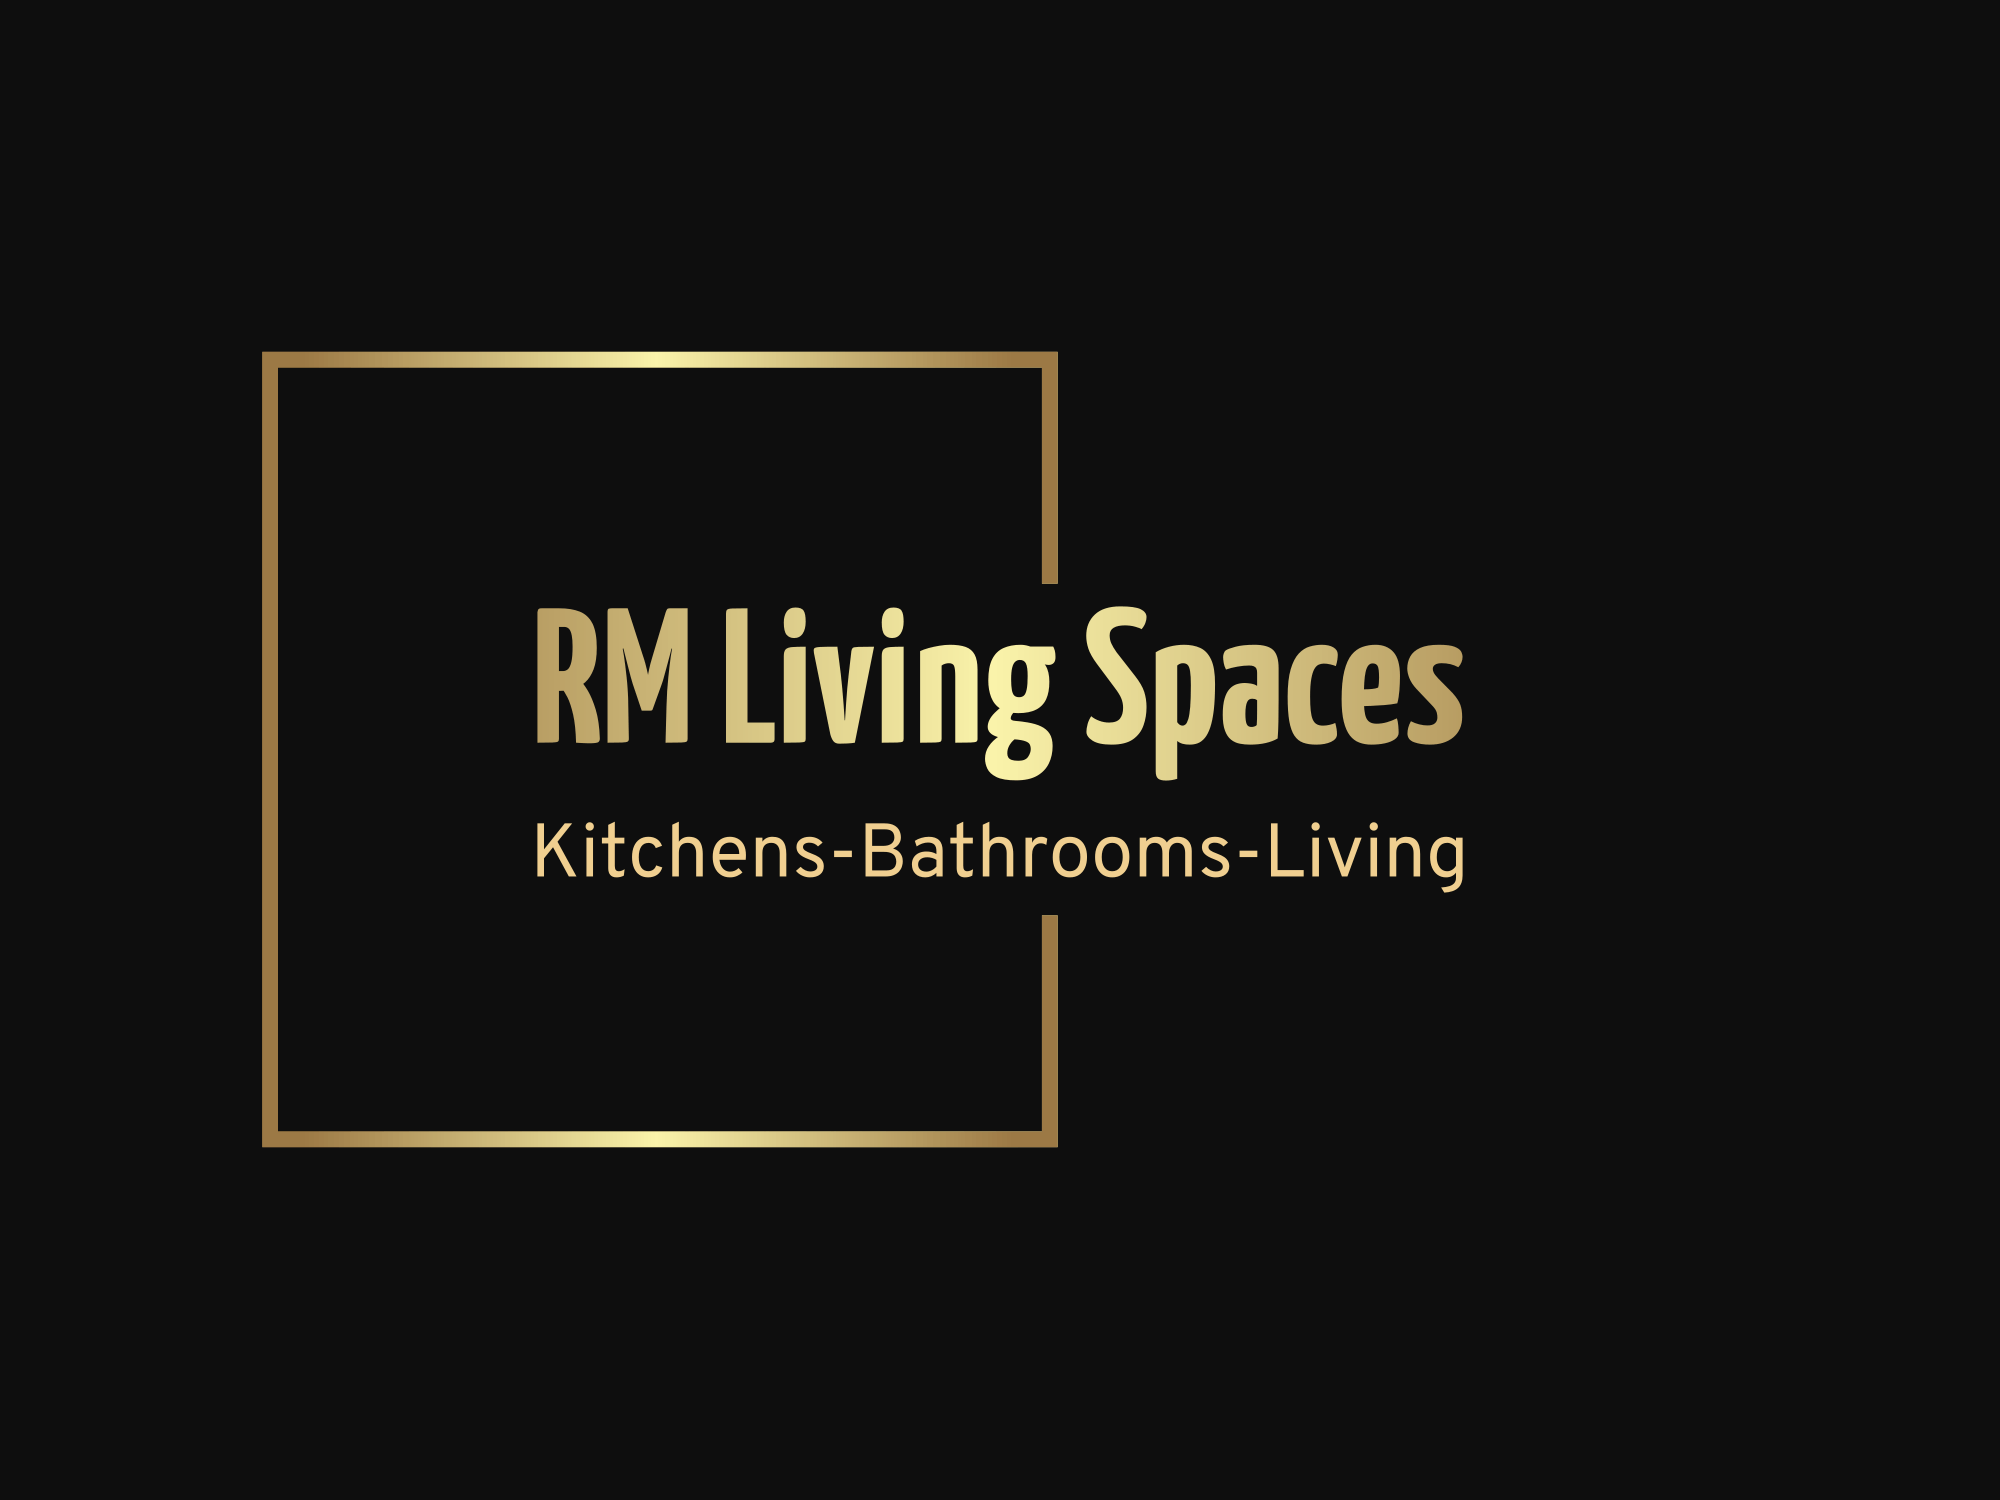 Logo of RM Living Spaces Kitchen Planners And Furnishers In Paignton, Devon